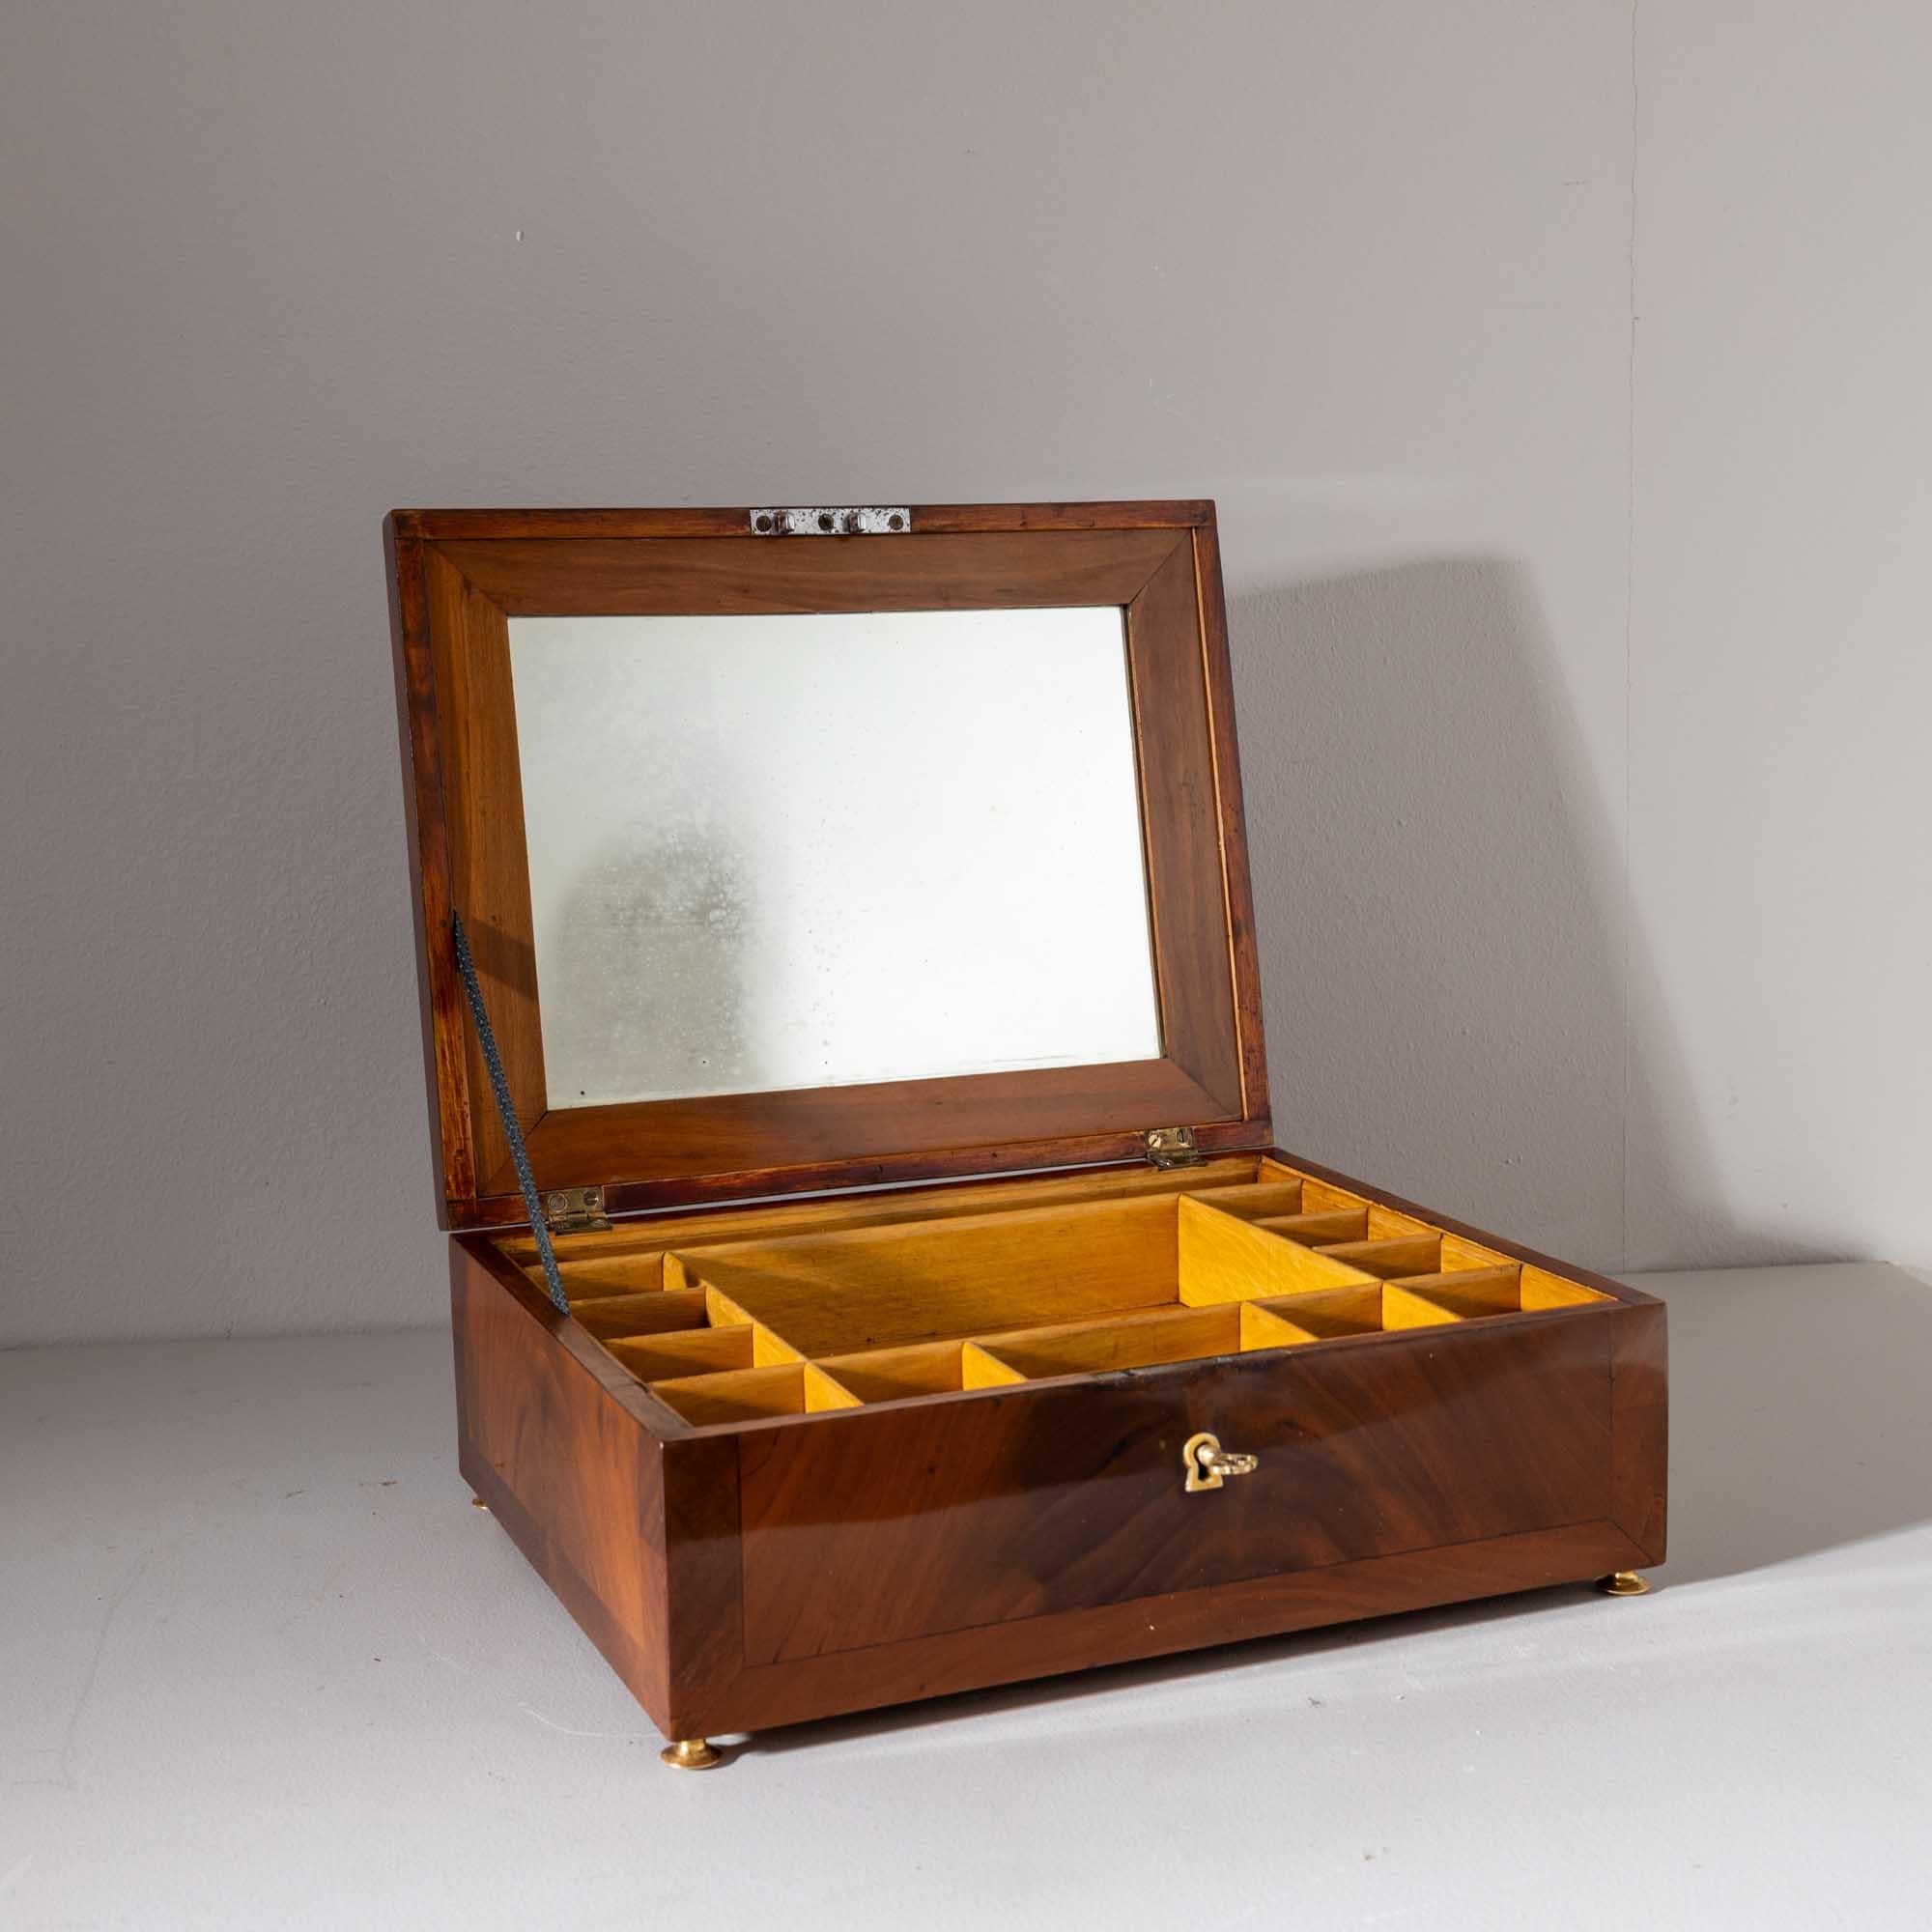 Small rectangular casket with slightly beveled lid and filling-shaped veneer pattern made of walnut. The casket stands on small brass feet. Inside it is mirrored and equipped with small compartments.